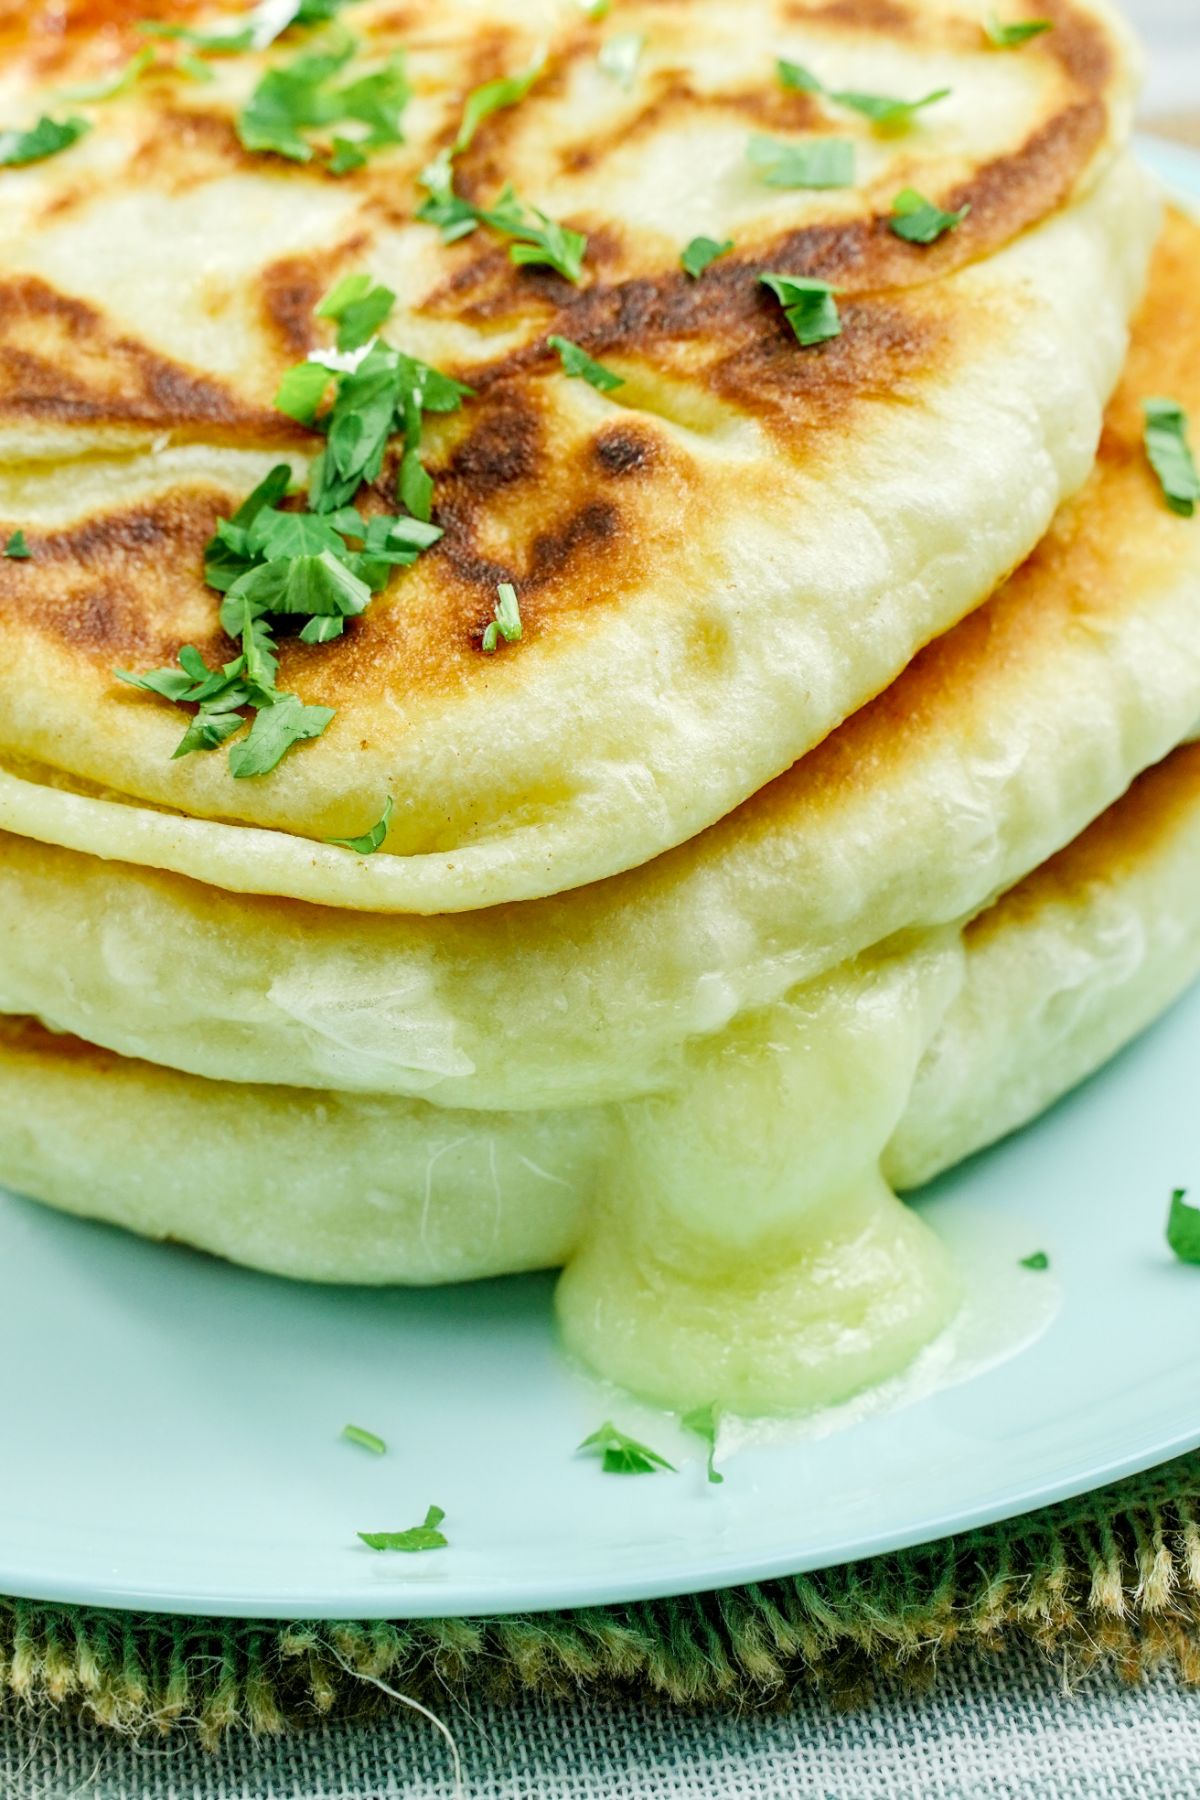 tall stack of piroshki with cheese melting out side on light blue plate